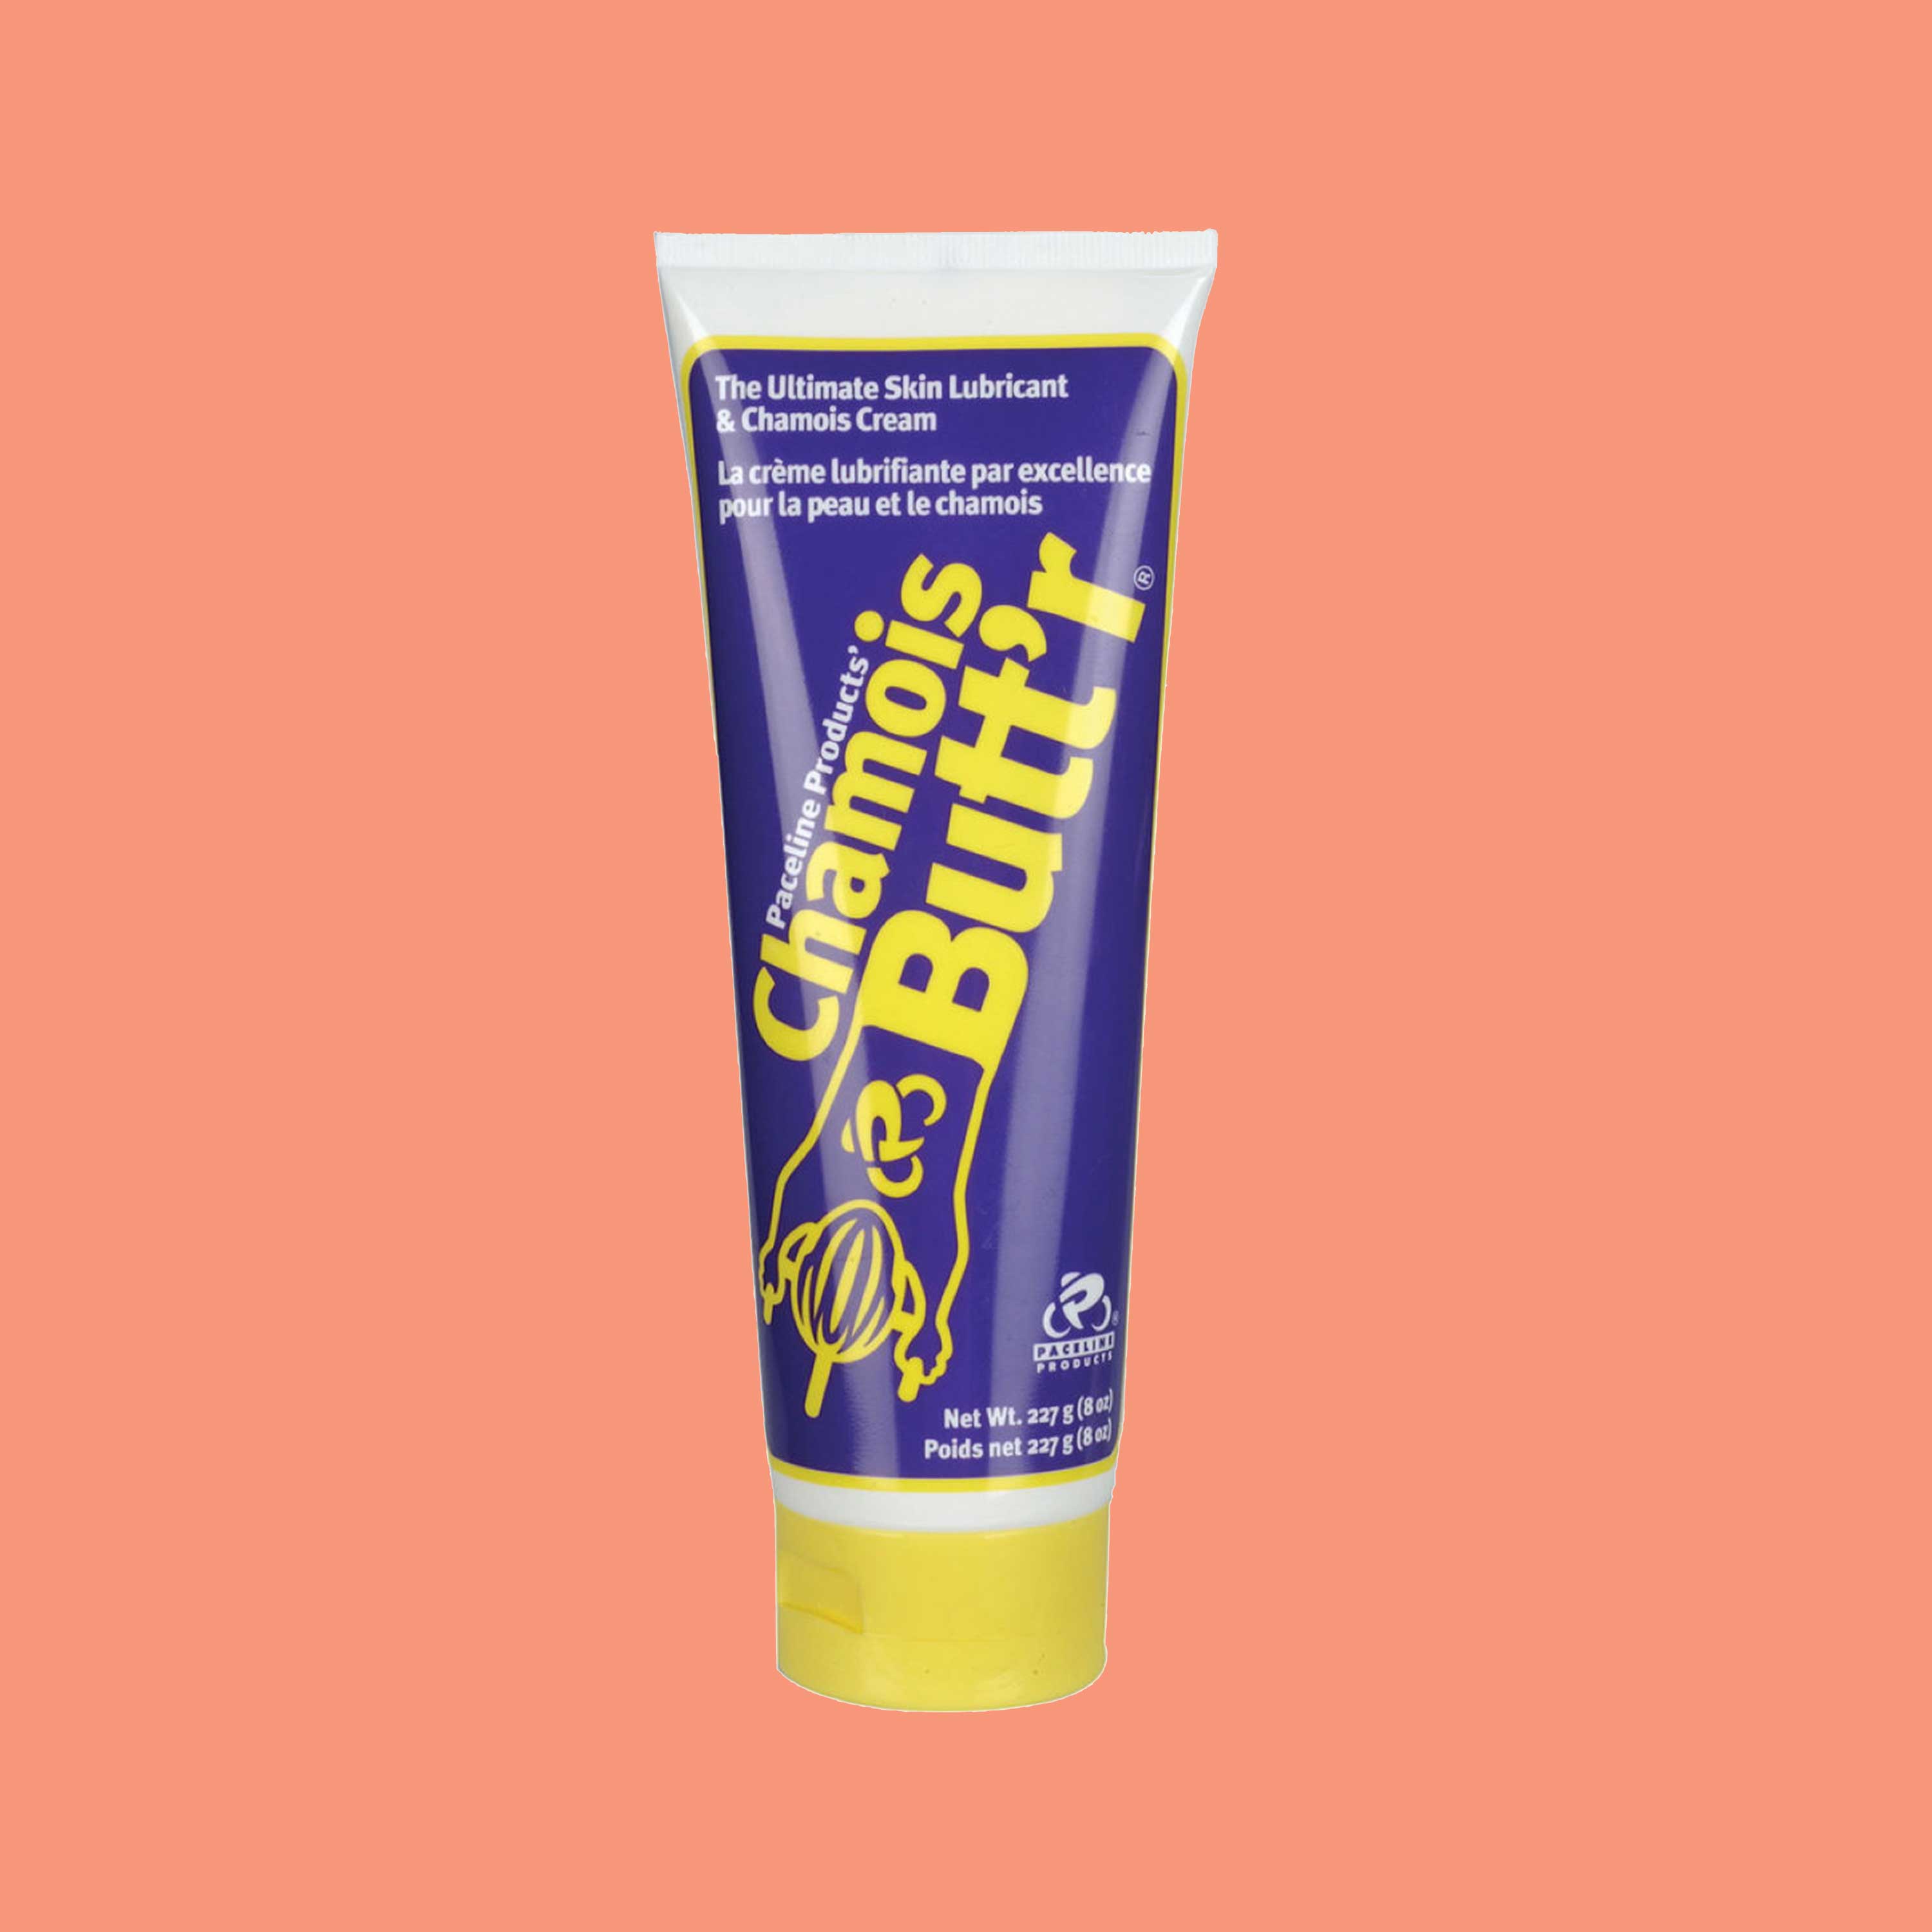 Say Goodbye To Chub Rub With These Miracle Finds
